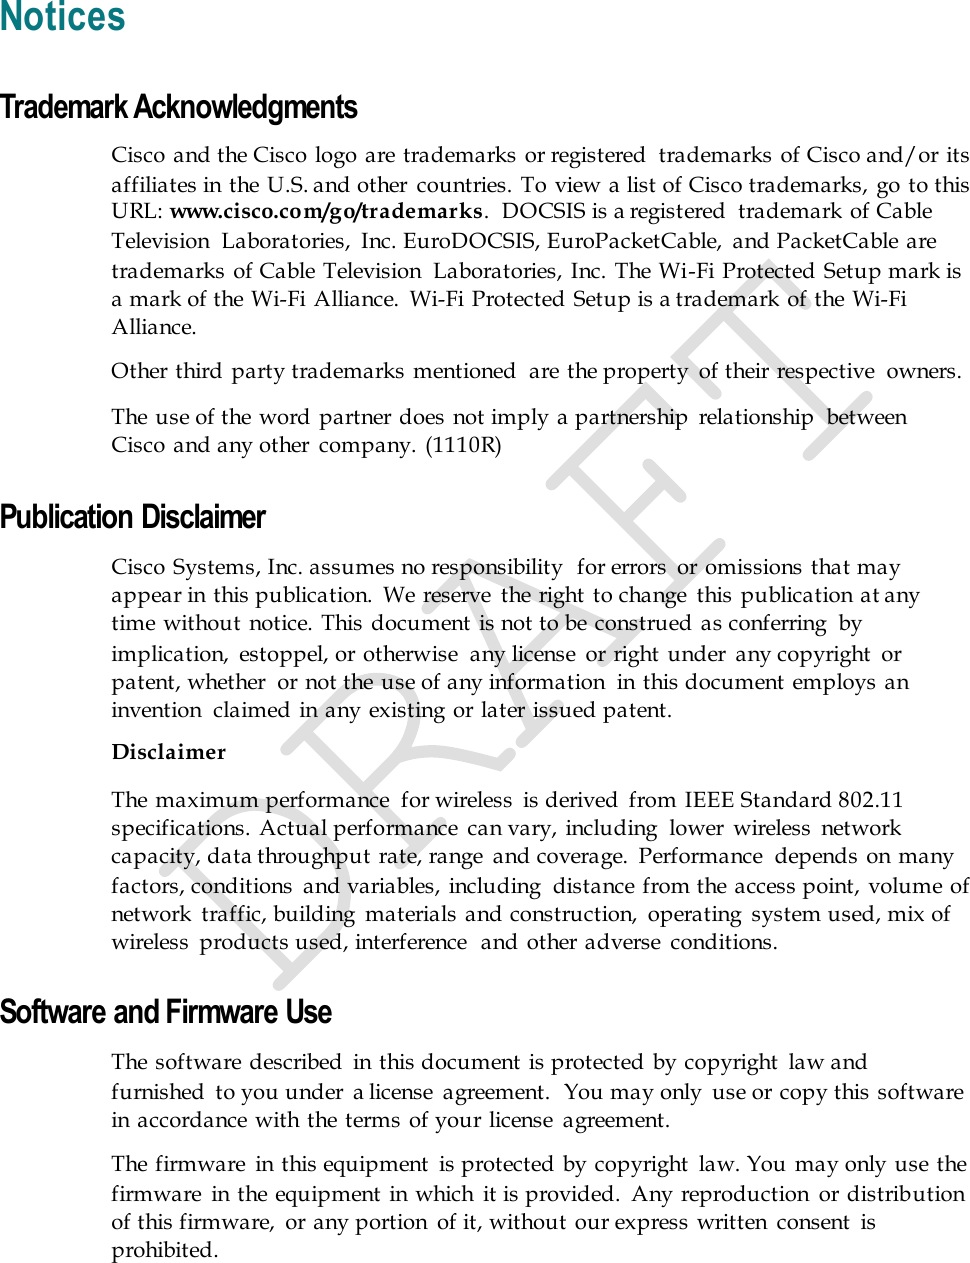   Notices Trademark Acknowledgments Cisco and the Cisco logo are trademarks  or registered  trademarks  of Cisco and/or its affiliates in the  U.S. and other  countries. To view a list of Cisco trademarks, go to this URL: www.cisco.com/go/trademarks.  DOCSIS is a registered  trademark of Cable Television  Laboratories,  Inc. EuroDOCSIS, EuroPacketCable,  and PacketCable are trademarks  of Cable Television  Laboratories, Inc. The Wi-Fi Protected Setup mark is a mark of the Wi-Fi Alliance.  Wi-Fi  Protected Setup is a trademark of the Wi-Fi Alliance. Other third party trademarks  mentioned  are  the property  of their respective  owners. The  use of the word partner does not imply a partnership  relationship  between Cisco and any other  company. (1110R) Publication Disclaimer Cisco Systems, Inc. assumes no responsibility  for errors  or omissions that may appear in this publication.  We reserve  the right  to change  this publication at any time without  notice. This document is not to be construed  as conferring  by implication,  estoppel, or otherwise  any license  or right under  any copyright  or patent, whether  or not the use of any information  in  this document employs an invention  claimed in  any existing or later  issued patent. Disclaimer The  maximum performance  for wireless  is derived  from  IEEE Standard 802.11 specifications. Actual performance  can vary, including  lower  wireless  network capacity, data throughput rate, range  and coverage.  Performance  depends on  many factors, conditions  and variables, including  distance from the access point, volume of network  traffic, building  materials  and construction,  operating  system used, mix of wireless  products used, interference  and other adverse  conditions. Software and Firmware Use The  software  described  in this document  is protected by copyright  law and furnished  to you under  a license  agreement.  You may only  use or copy this software in accordance with  the terms of your license  agreement. The  firmware  in this equipment  is protected  by copyright  law. You may only use the firmware  in the  equipment  in which  it is provided.  Any reproduction  or distribution of this firmware,  or any portion  of it, without  our express written  consent  is prohibited. 